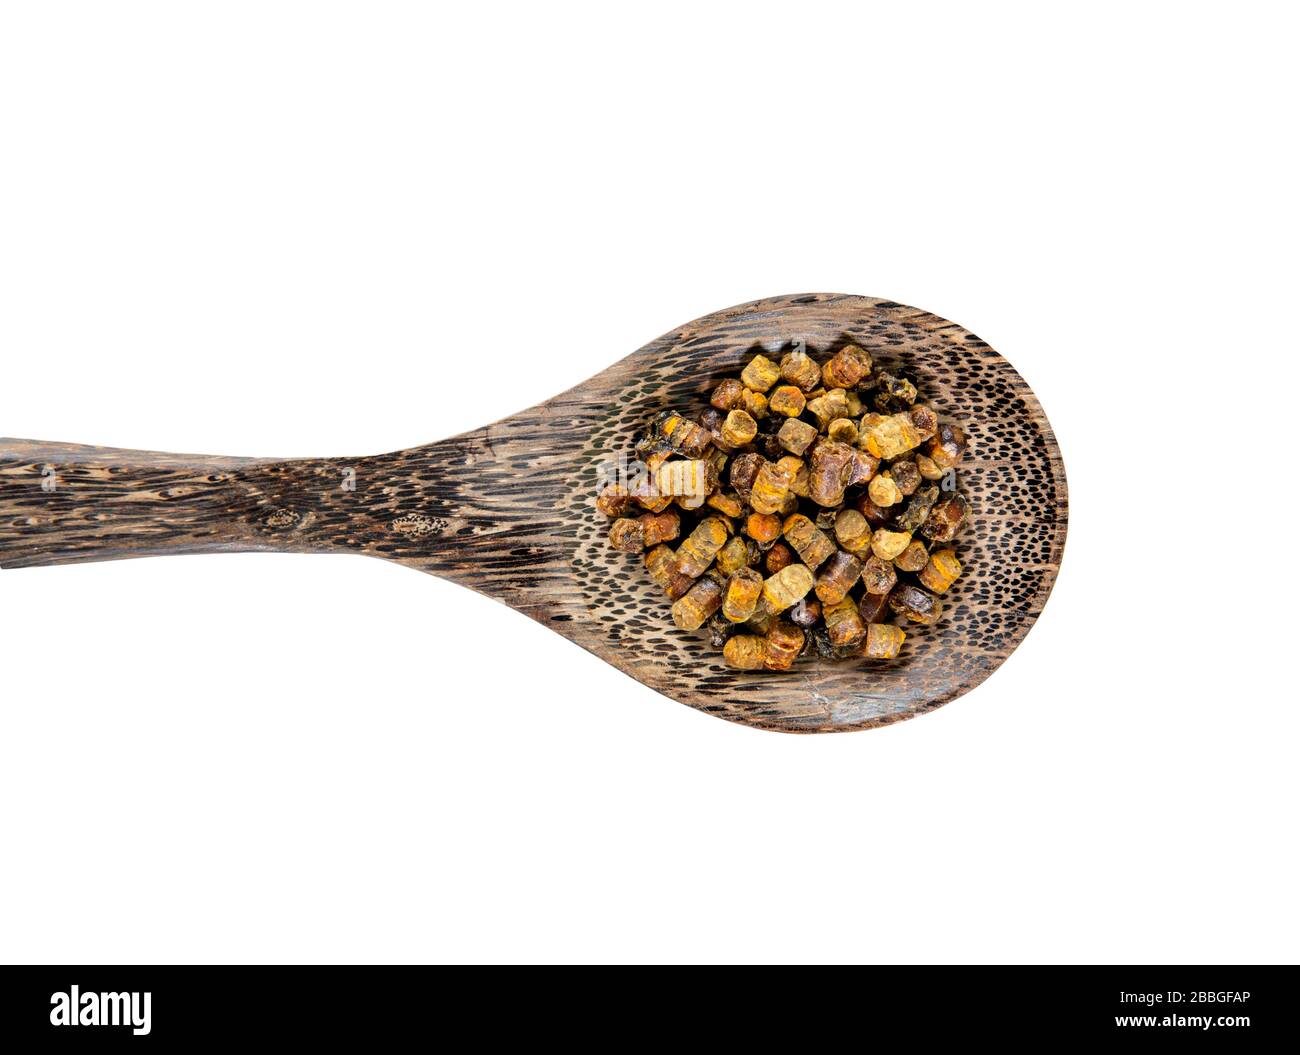 Fermented bee bread also known as fermented bee pollen on wood spoon isolated on white background. Alternative medicine concept. Stock Photo